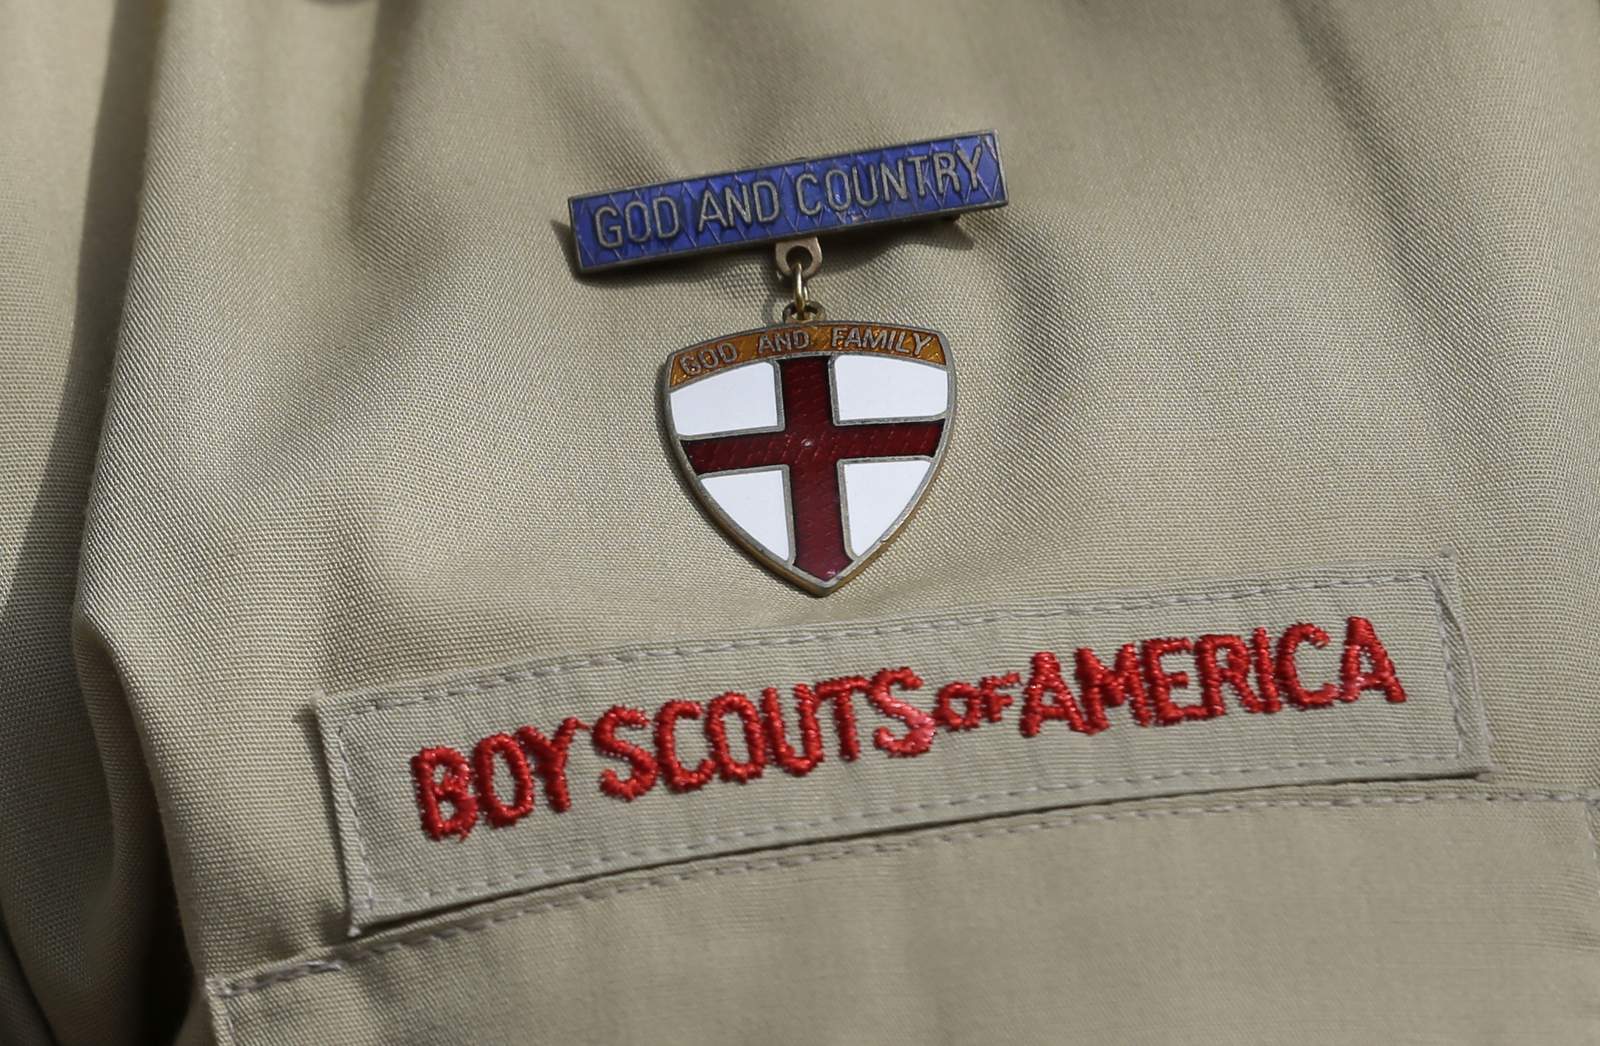 Victims agree to extend temporary halt on Boy Scout lawsuits